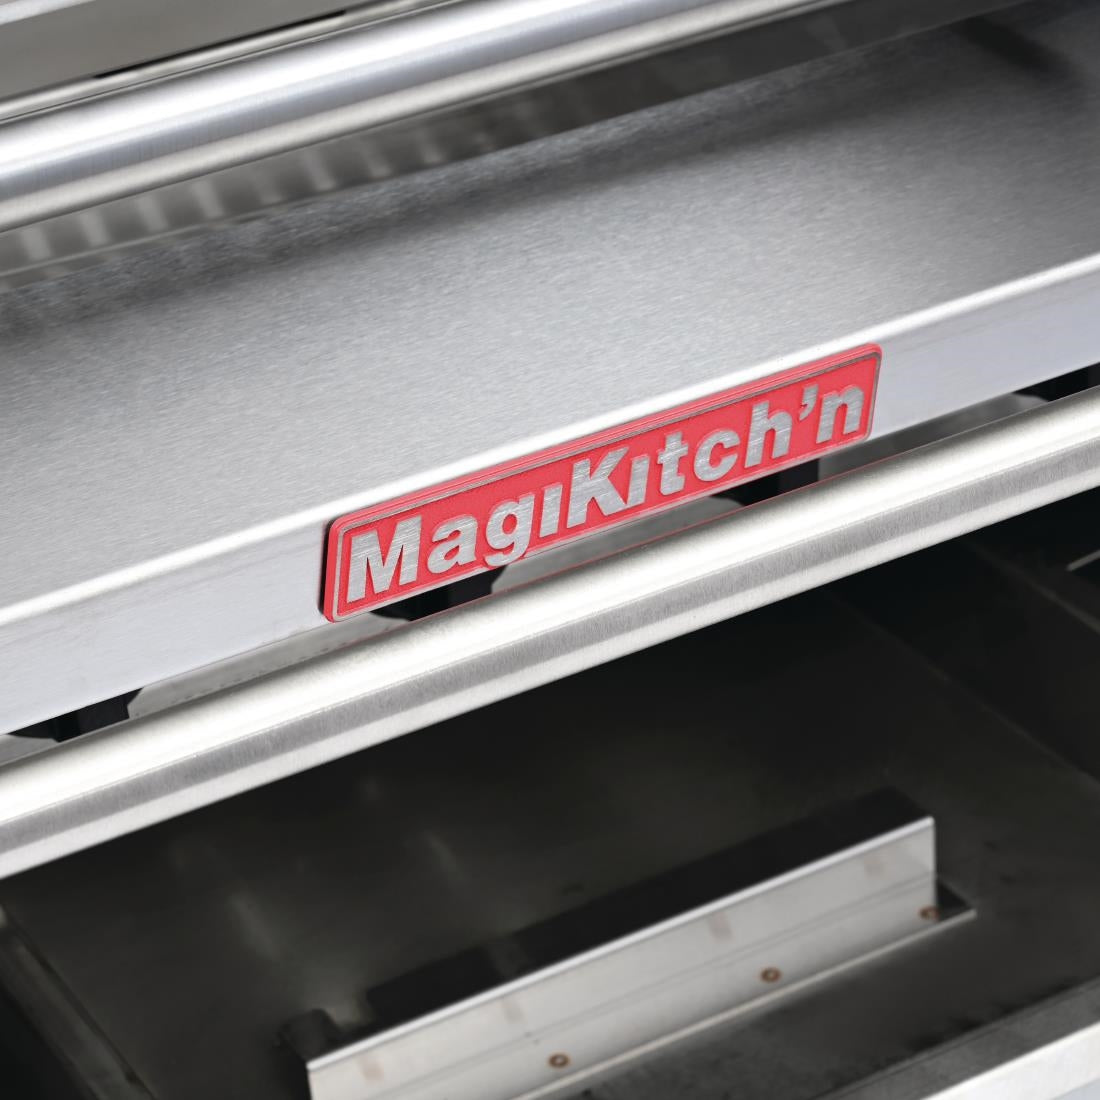 FP871 MagiKitch'n Gas Chargrill RMB636 JD Catering Equipment Solutions Ltd